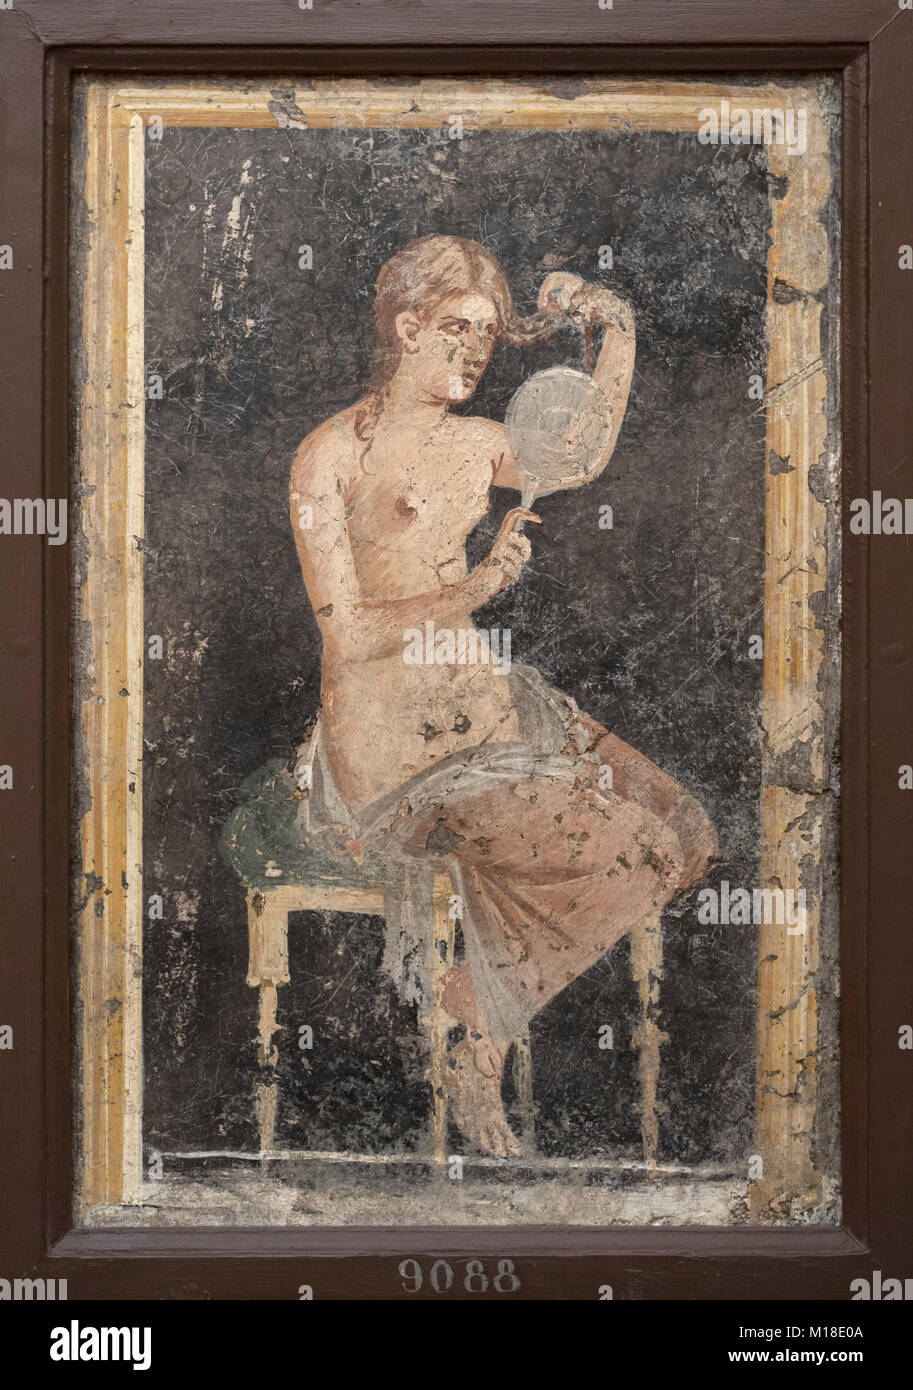 Naples. Italy. Portrait of a woman combing her hair, 1st century A.D. Museo Archeologico Nazionale di Napoli. Naples National Archaeological Museum.   Stock Photo